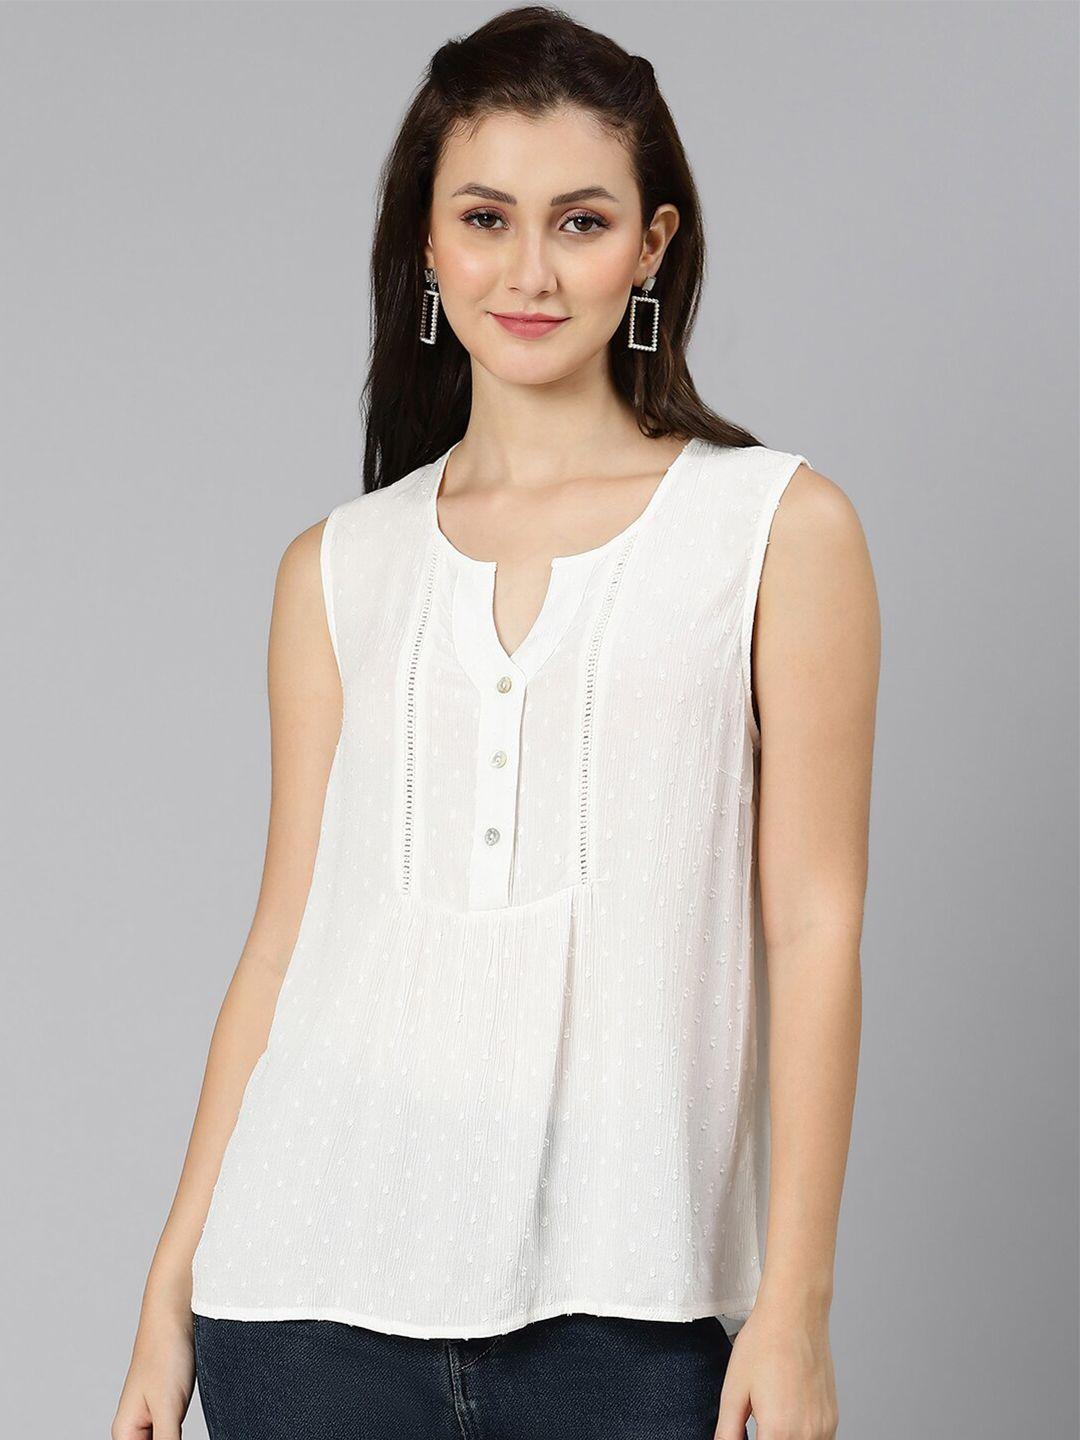 oxolloxo-white-solid-cotton-top